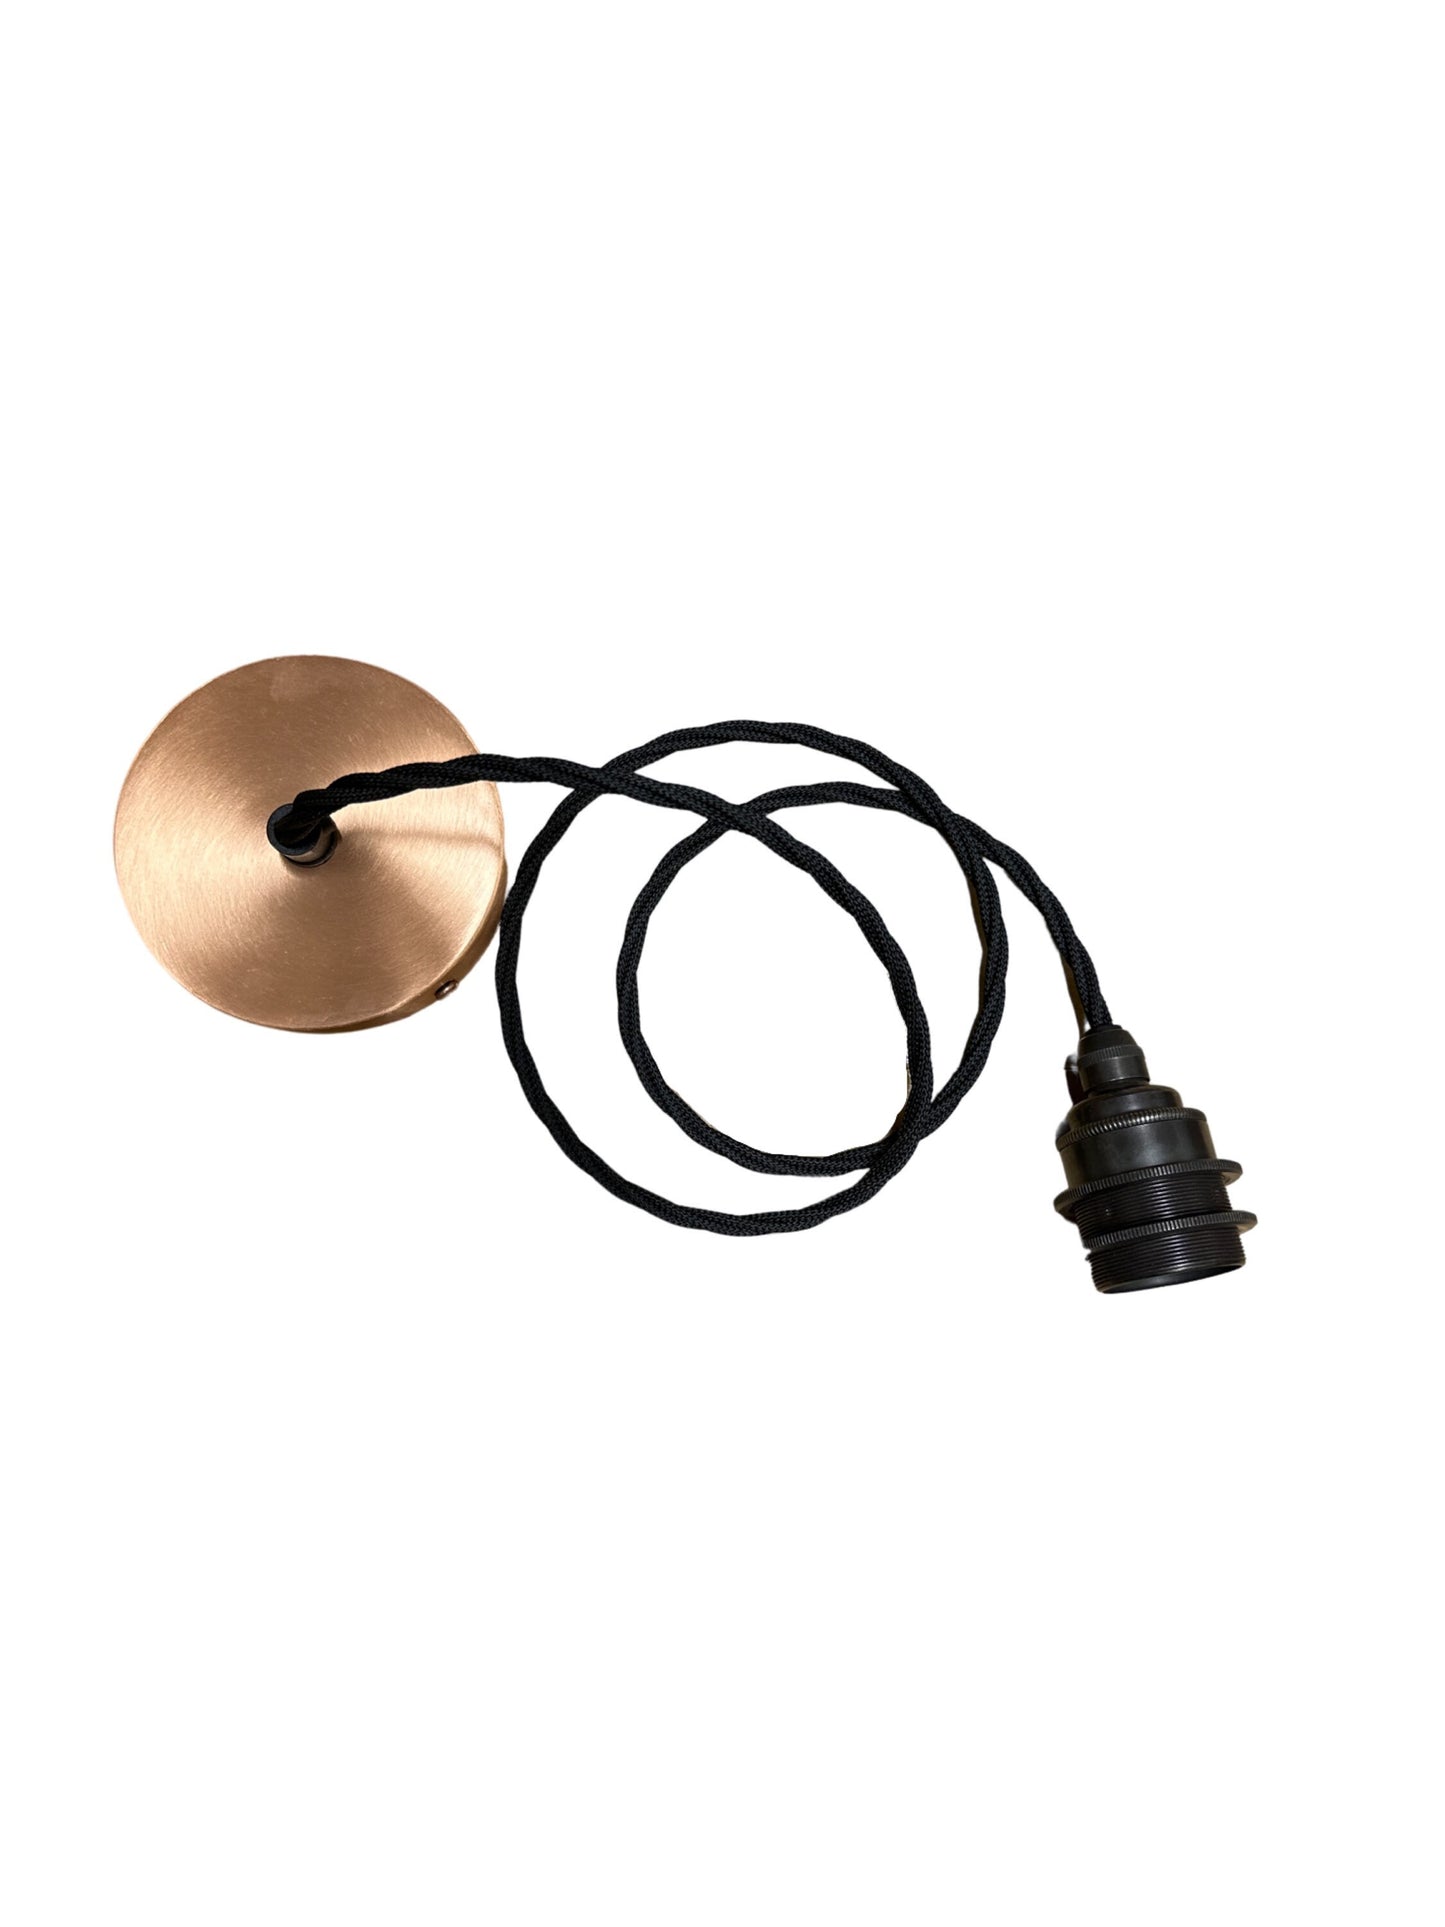 Solid Copper ~ Single Drop Pendant Set E27 | Ceiling Dining Room Light | Kitchen Table Hanging Light